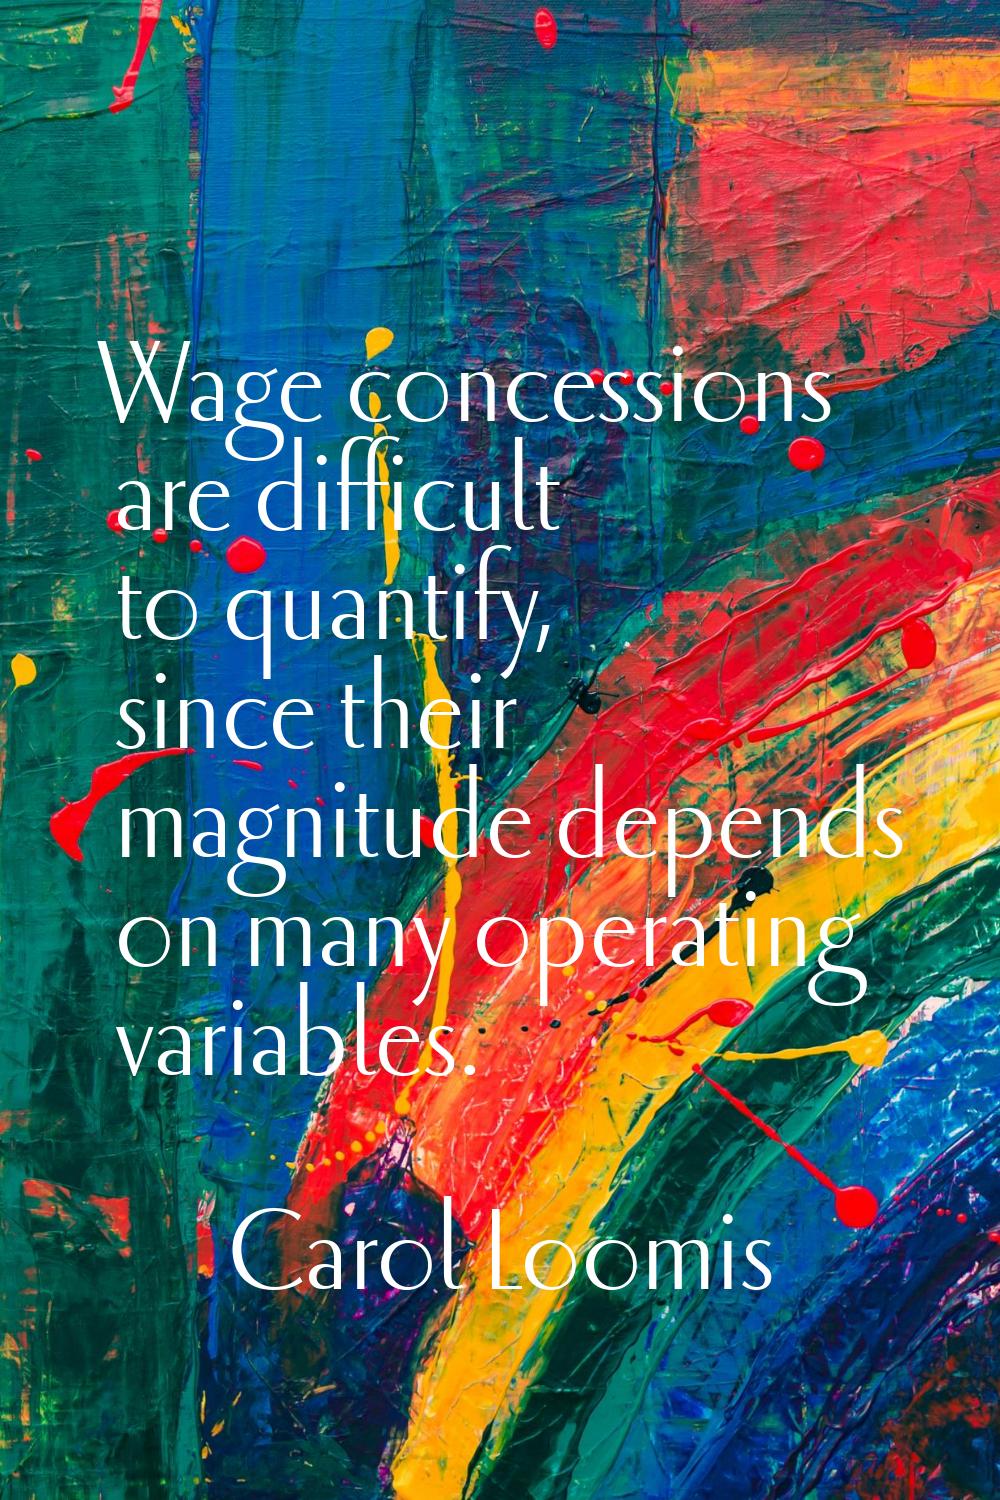 Wage concessions are difficult to quantify, since their magnitude depends on many operating variabl